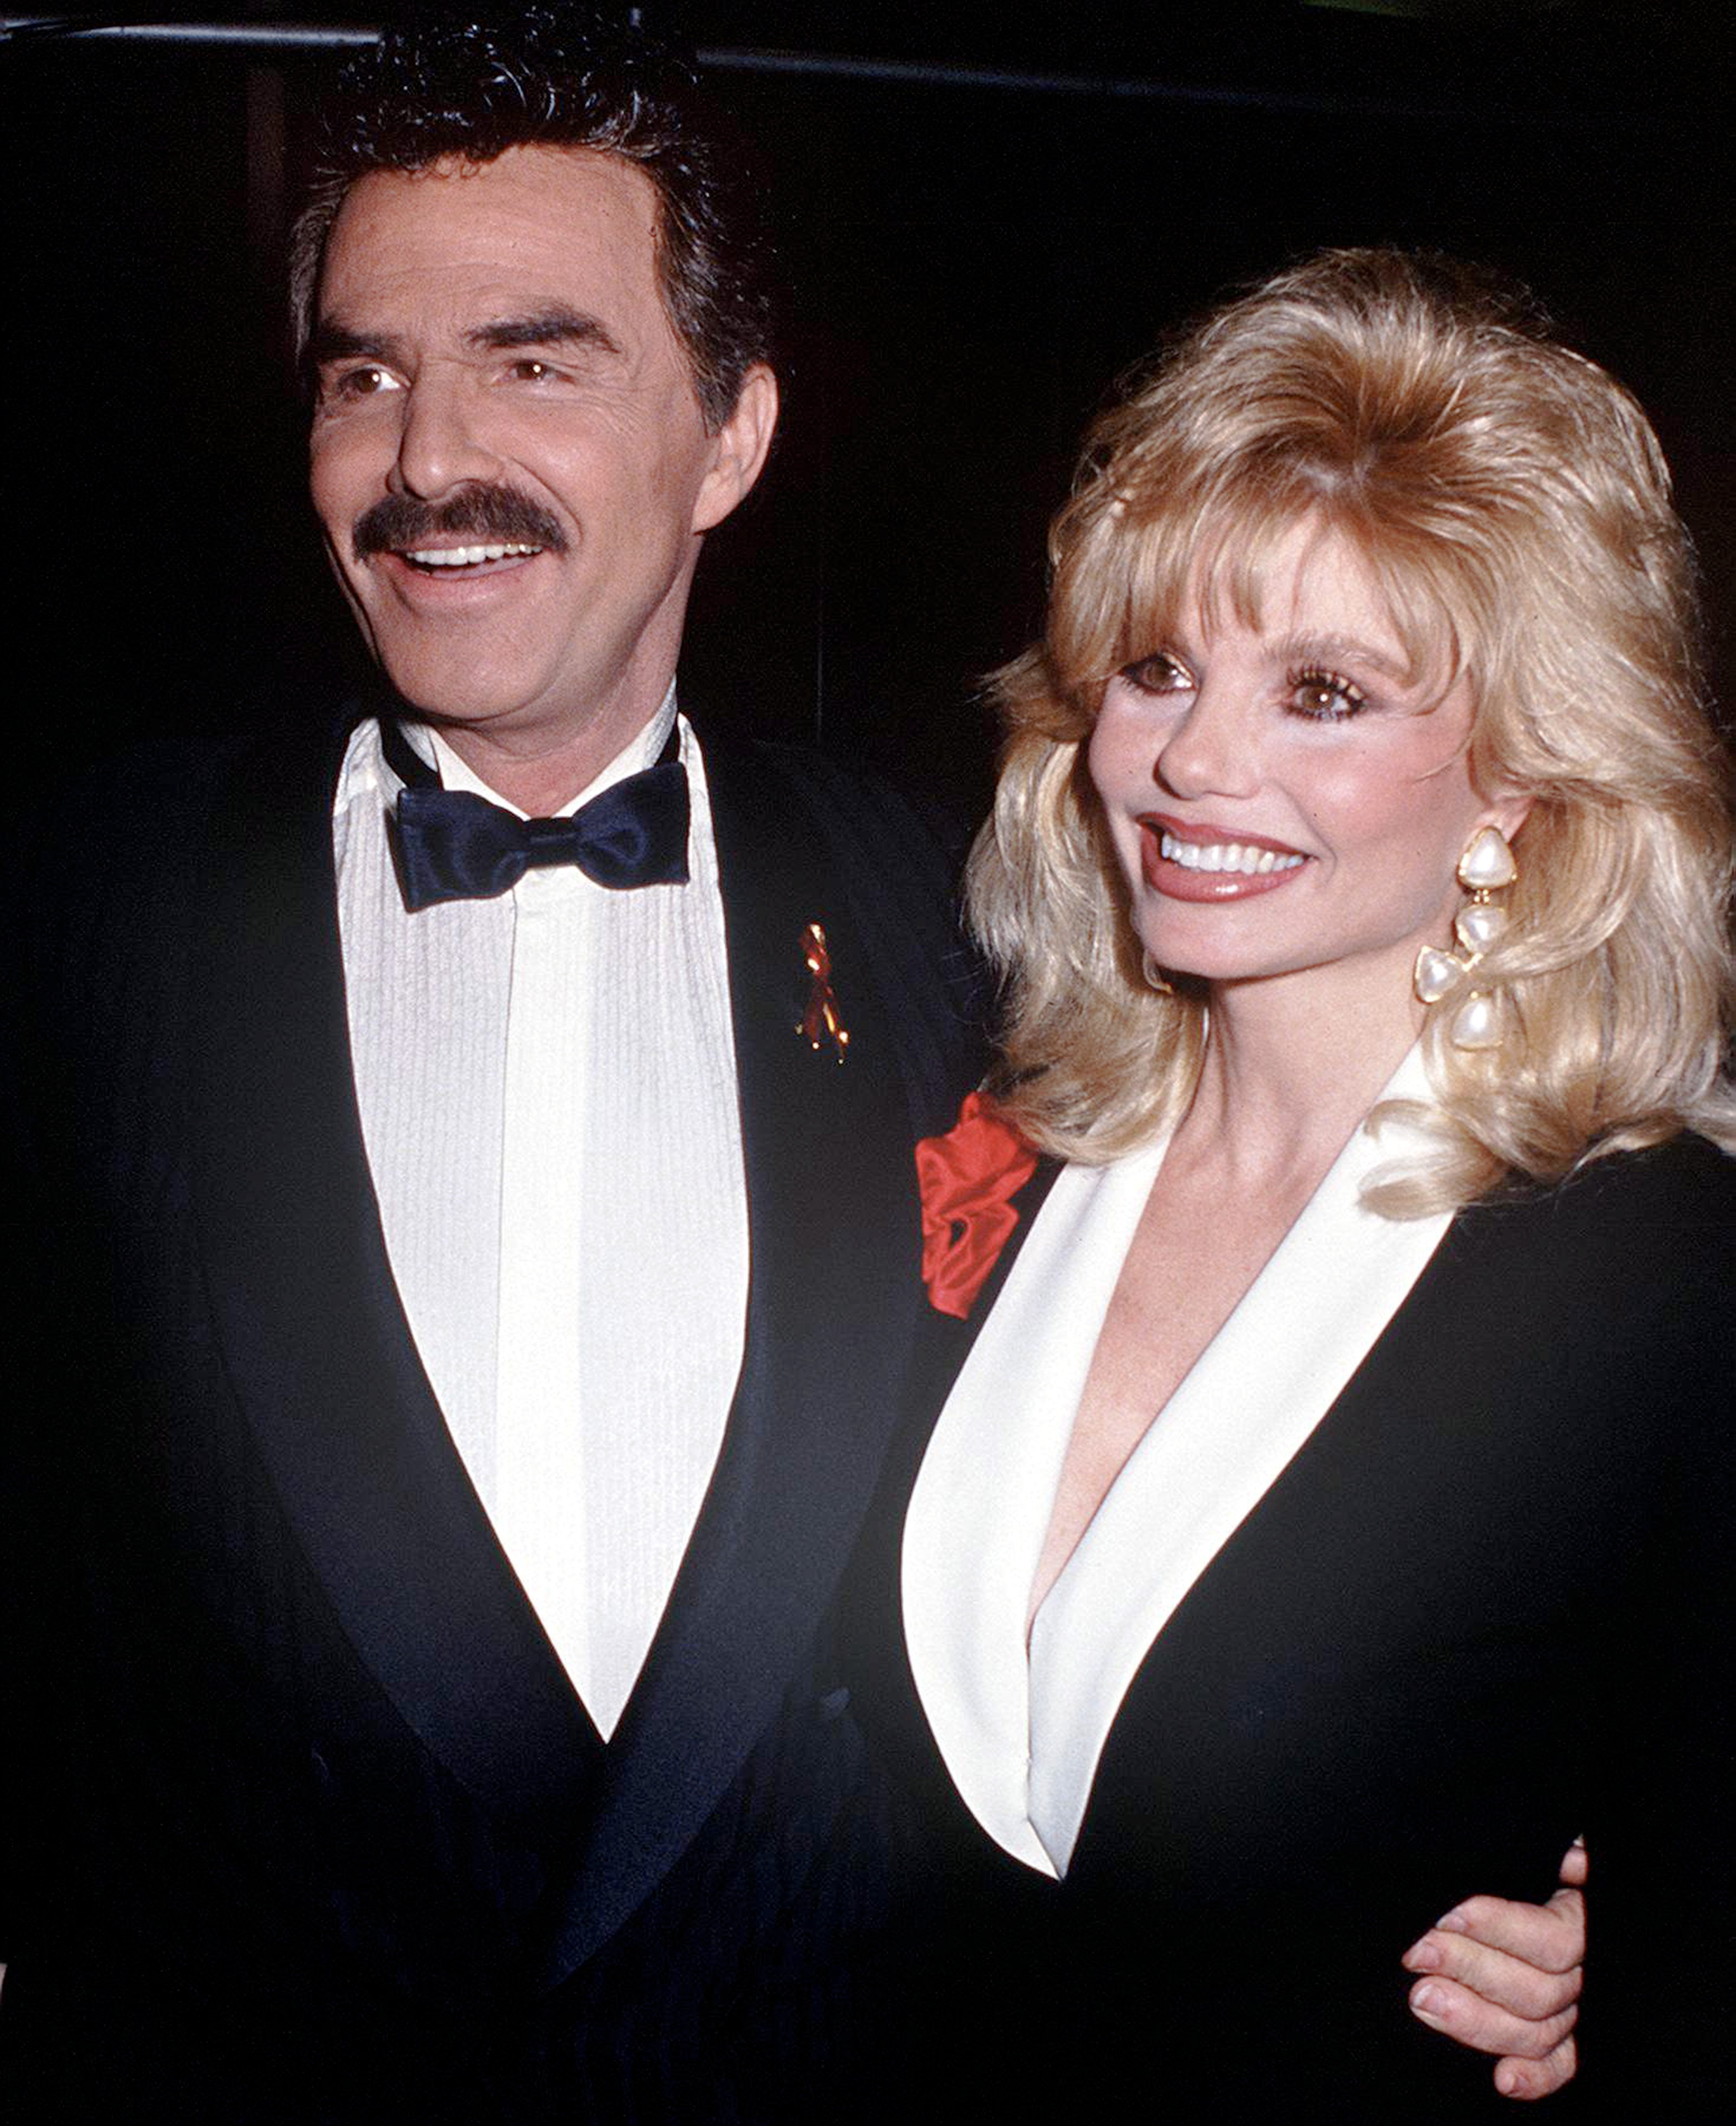 Burt Reynolds with actress Loni Anderson pictured donning black and white coordinating outfits in 1992. / Source: Getty Images